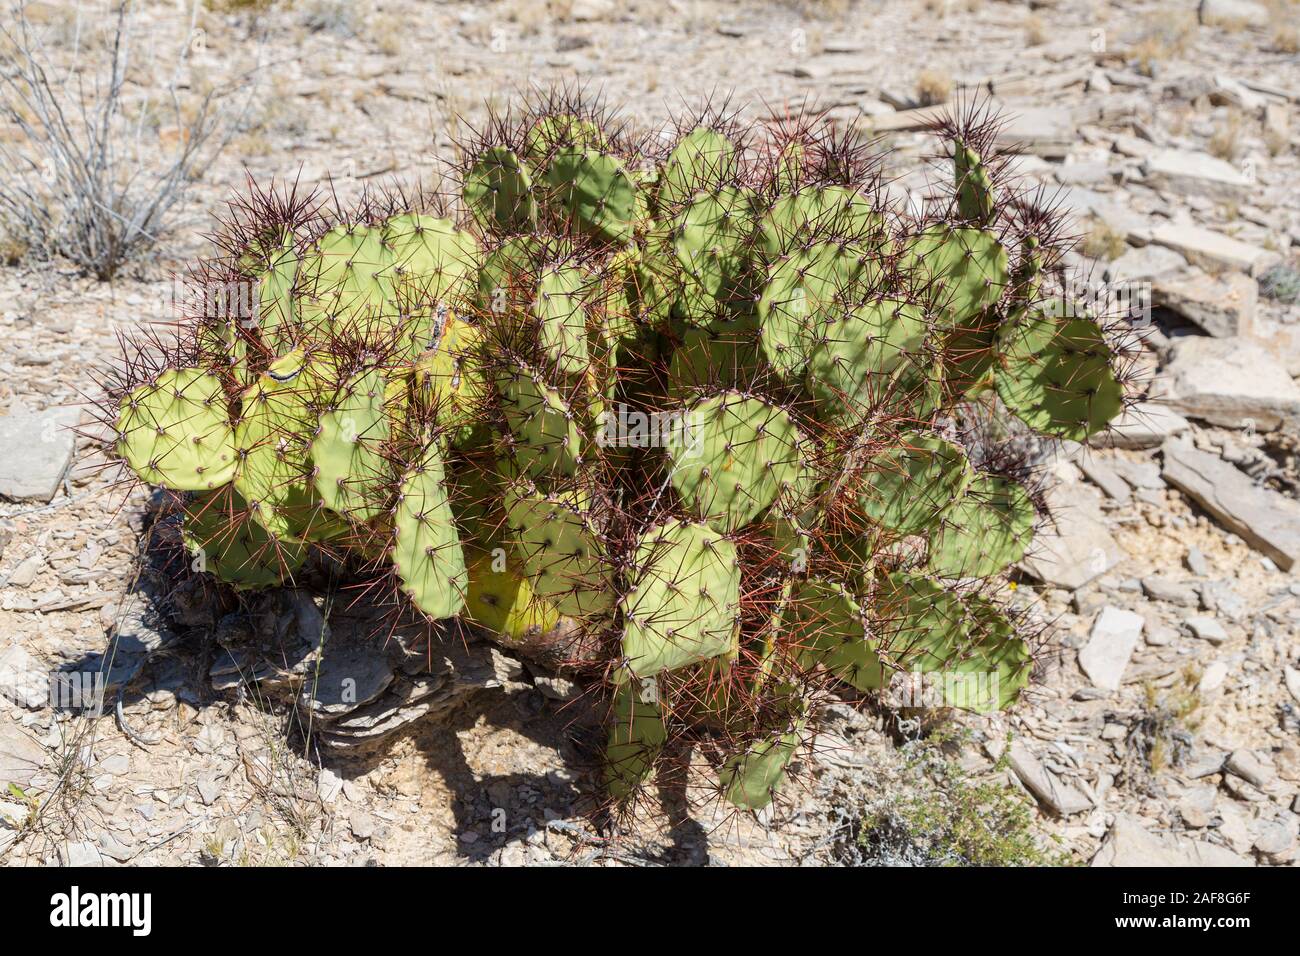 Big Bend National Park, Texas.  Spiny-fruited Prickly Pear (Beavertail) Cactus, opuntia spinosibacca. Stock Photo